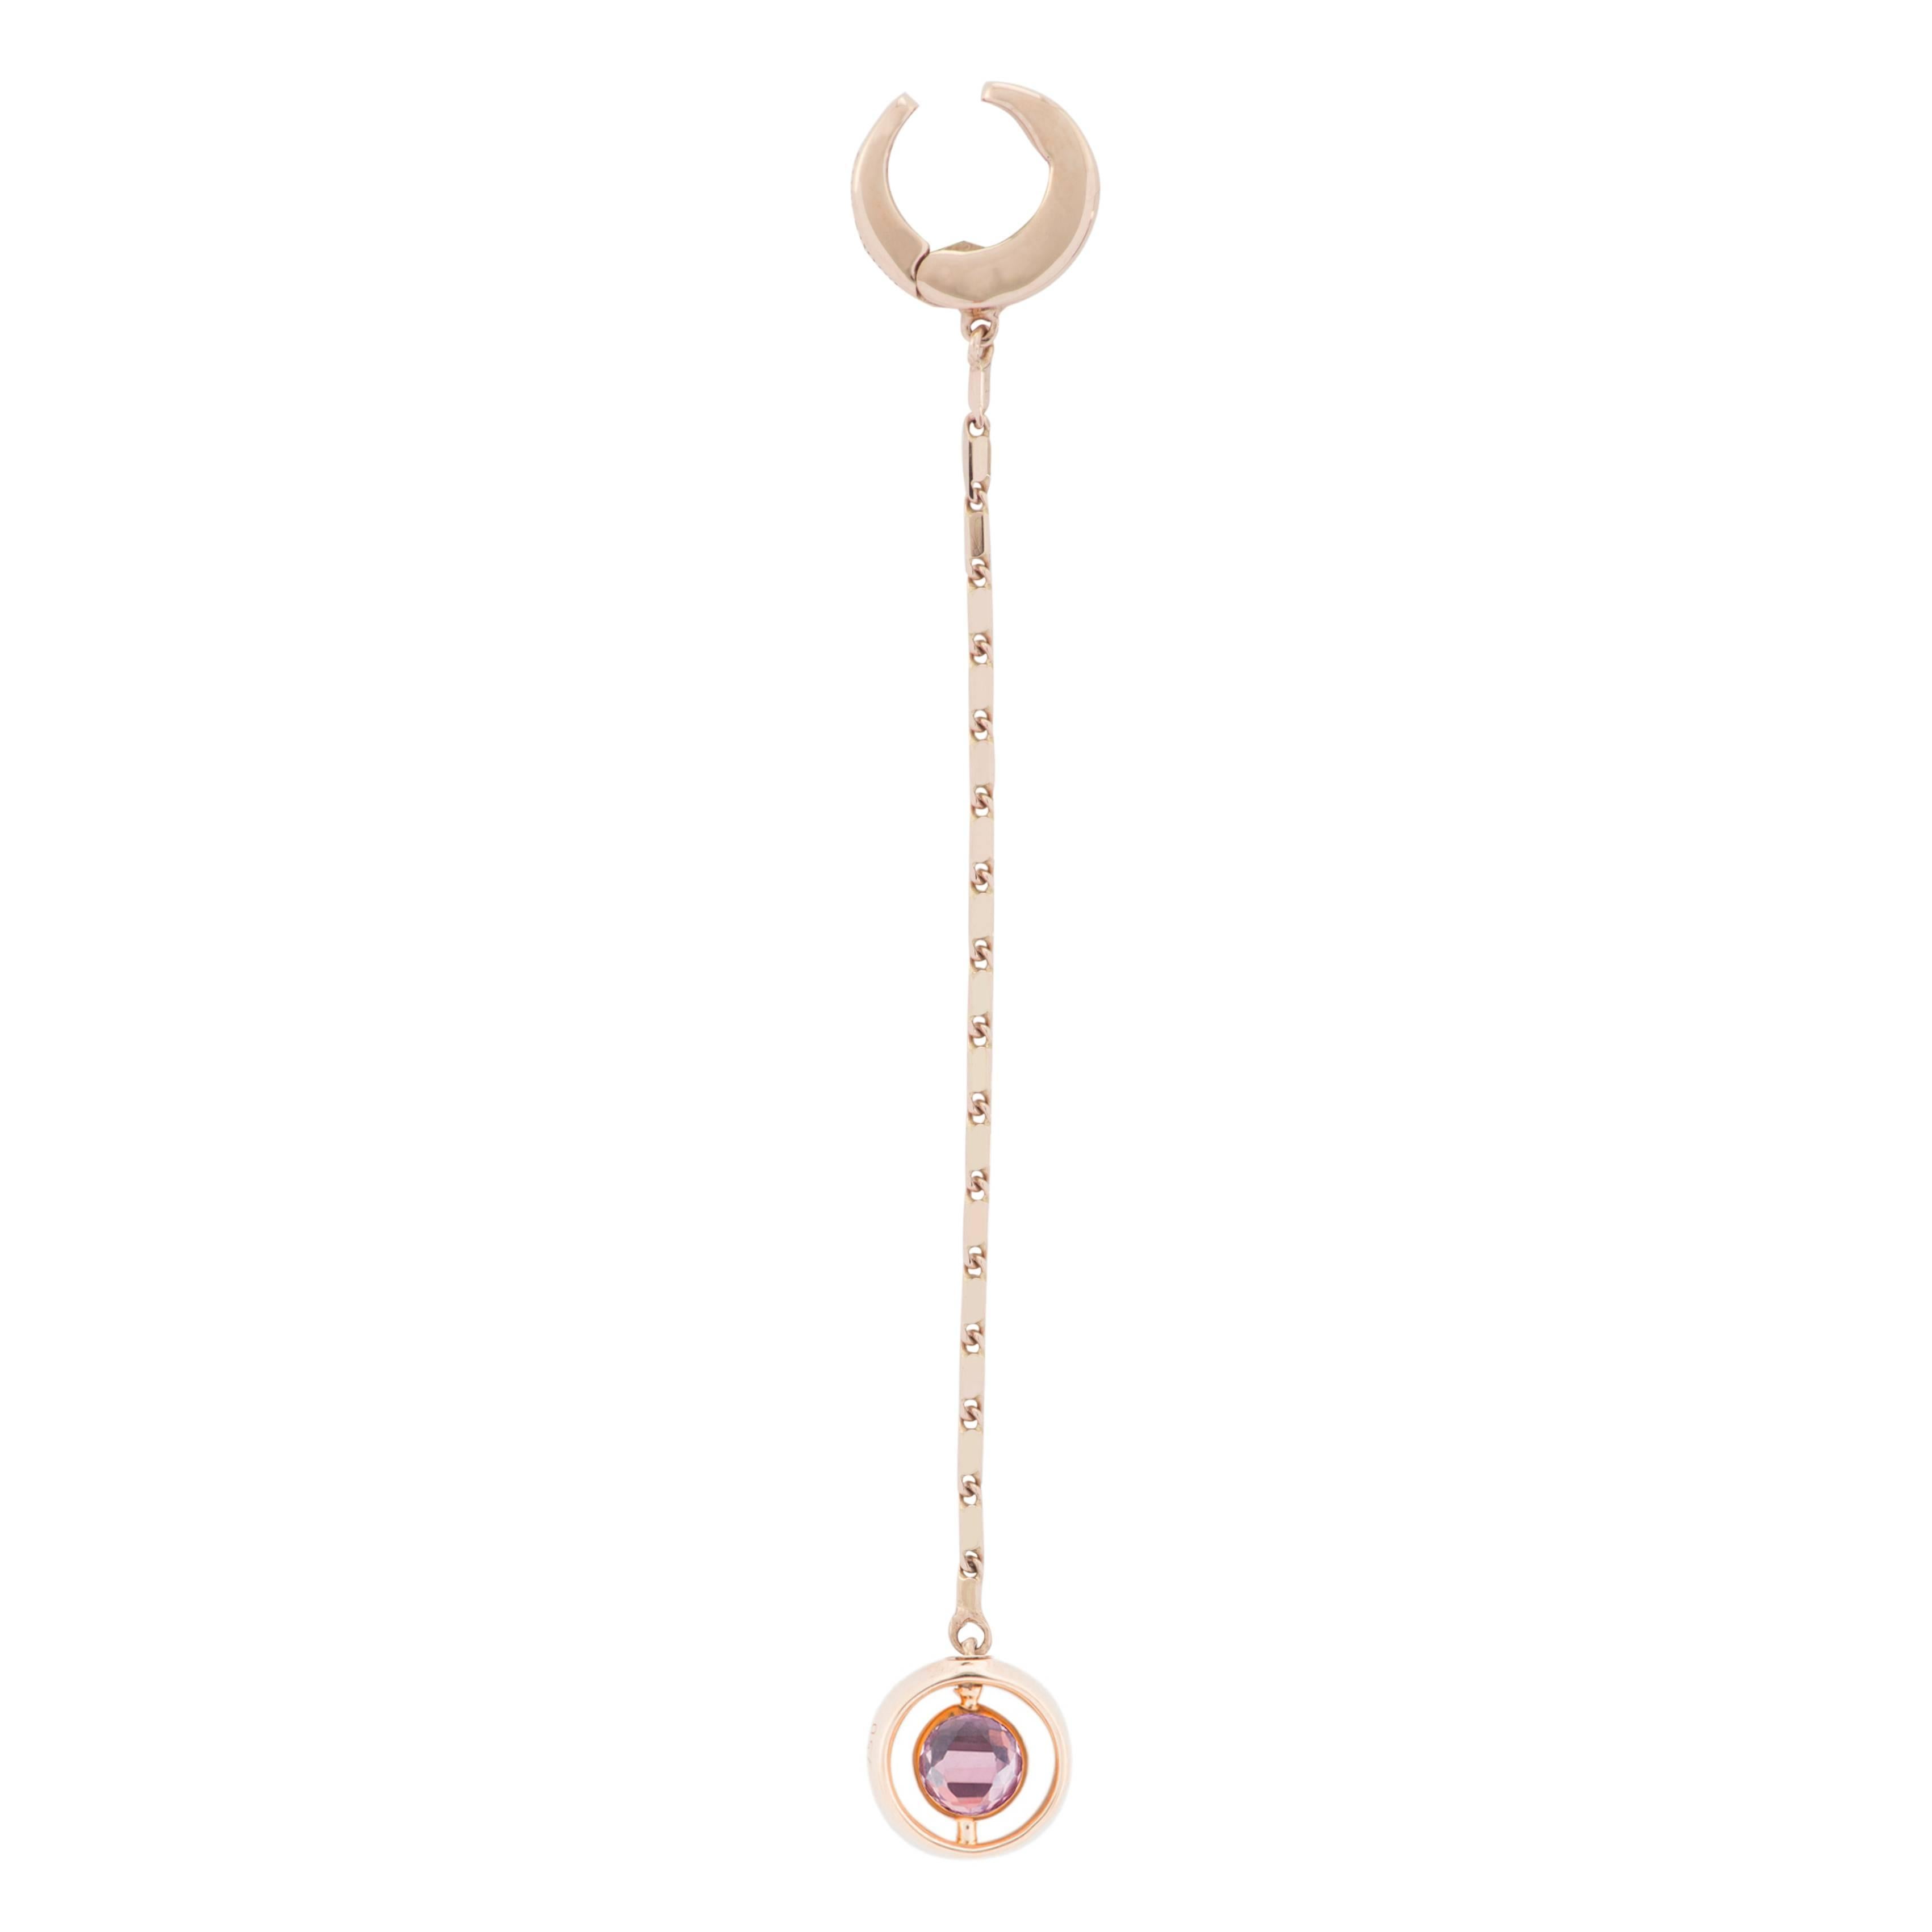 This Single Long Clip Earring is designed by the French Jewelry brand Marie Mas. It is in 18 Carat Pink Gold, with Diamonds, Pink Amethyst and London Blue Topaz. The center stone is reversible : there is a Pink Amethyst and a London Blue Topaz back